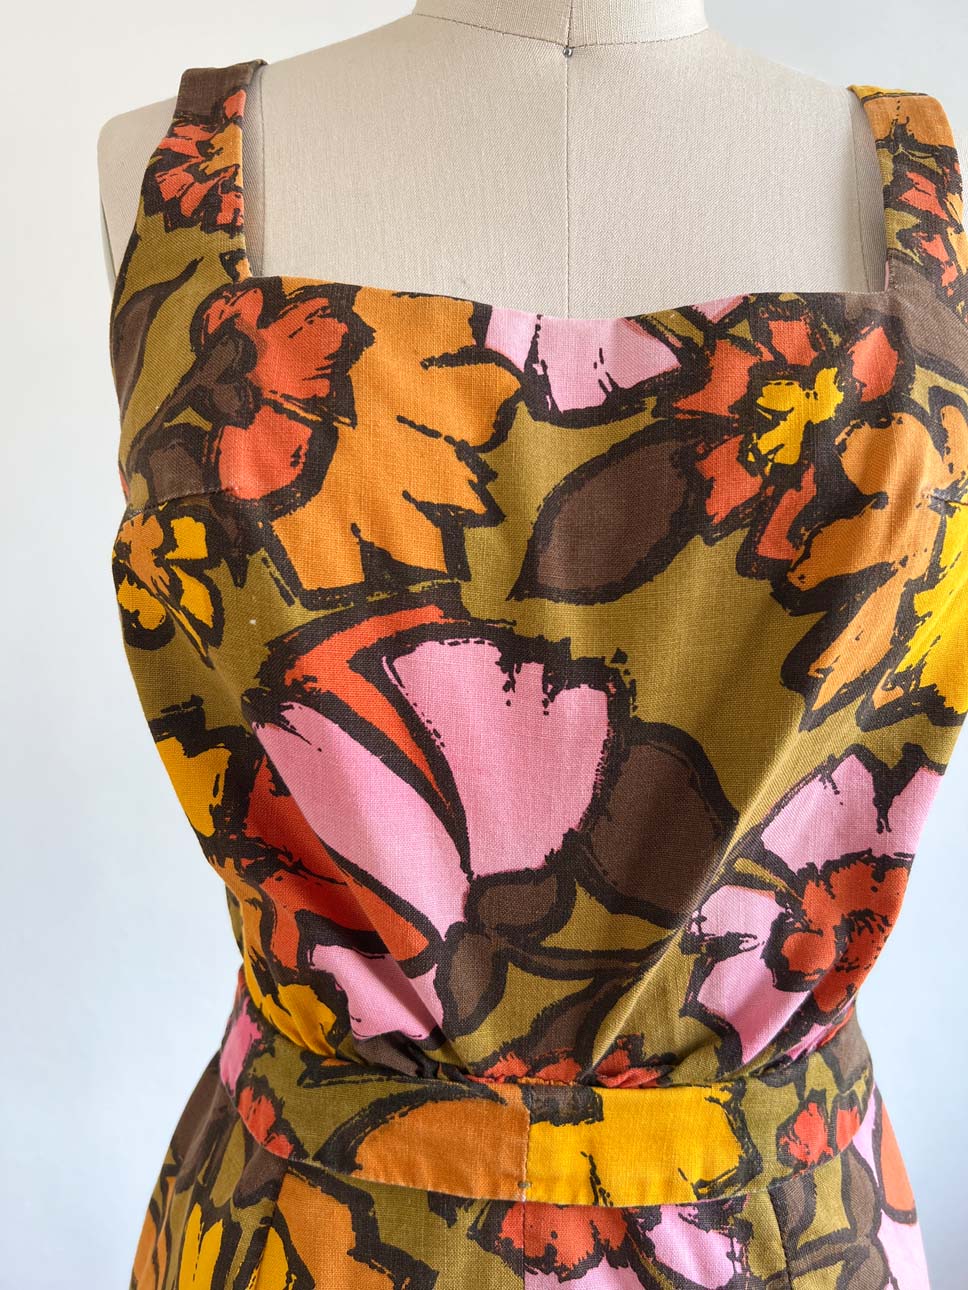 Vintage 1950s to 1960s Sculpted Shorts Romper - Designer Cotton Mod Saturated Olive, Orange, Pink Cotton Designer Swimsuit Playsuit Size XS to S